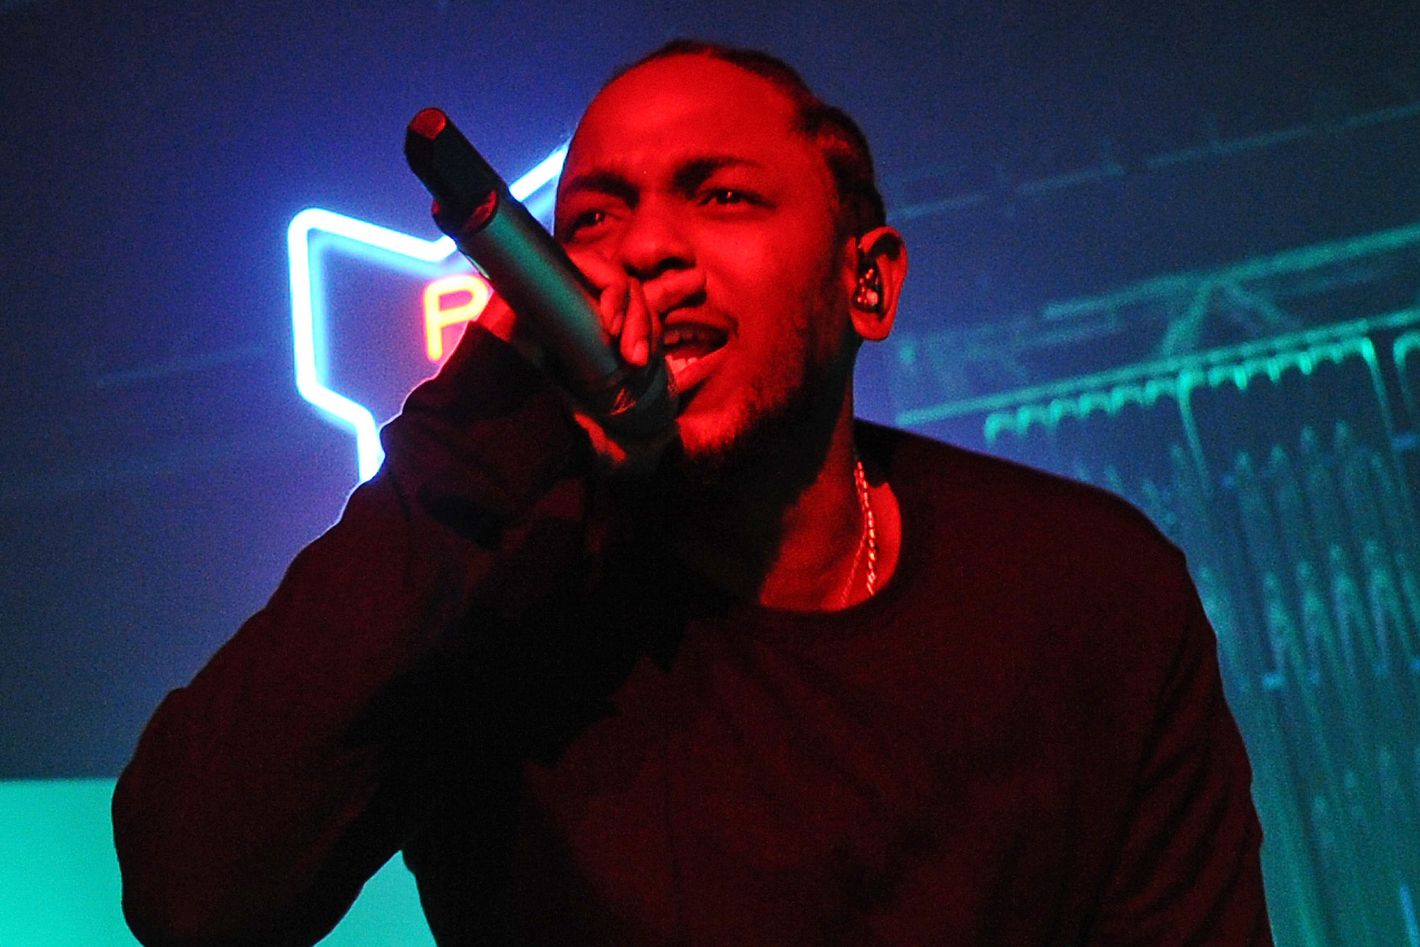 Kendrick Lamar Pauses Concert To Speak To Young Boy In Crowd